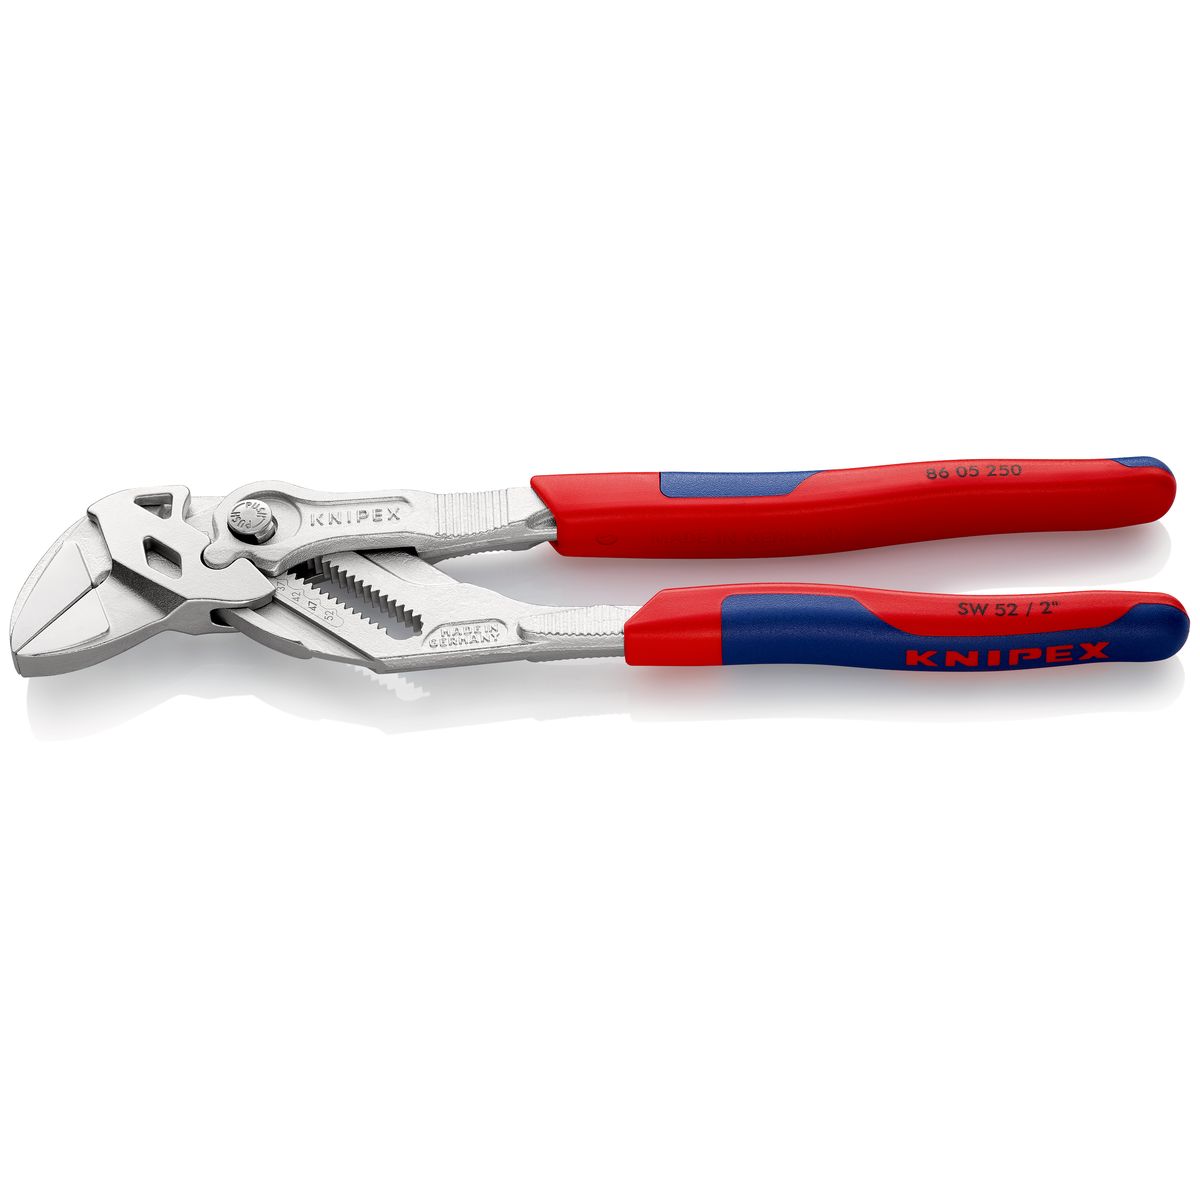 PLIER WRENCHES 8605250 Knipex